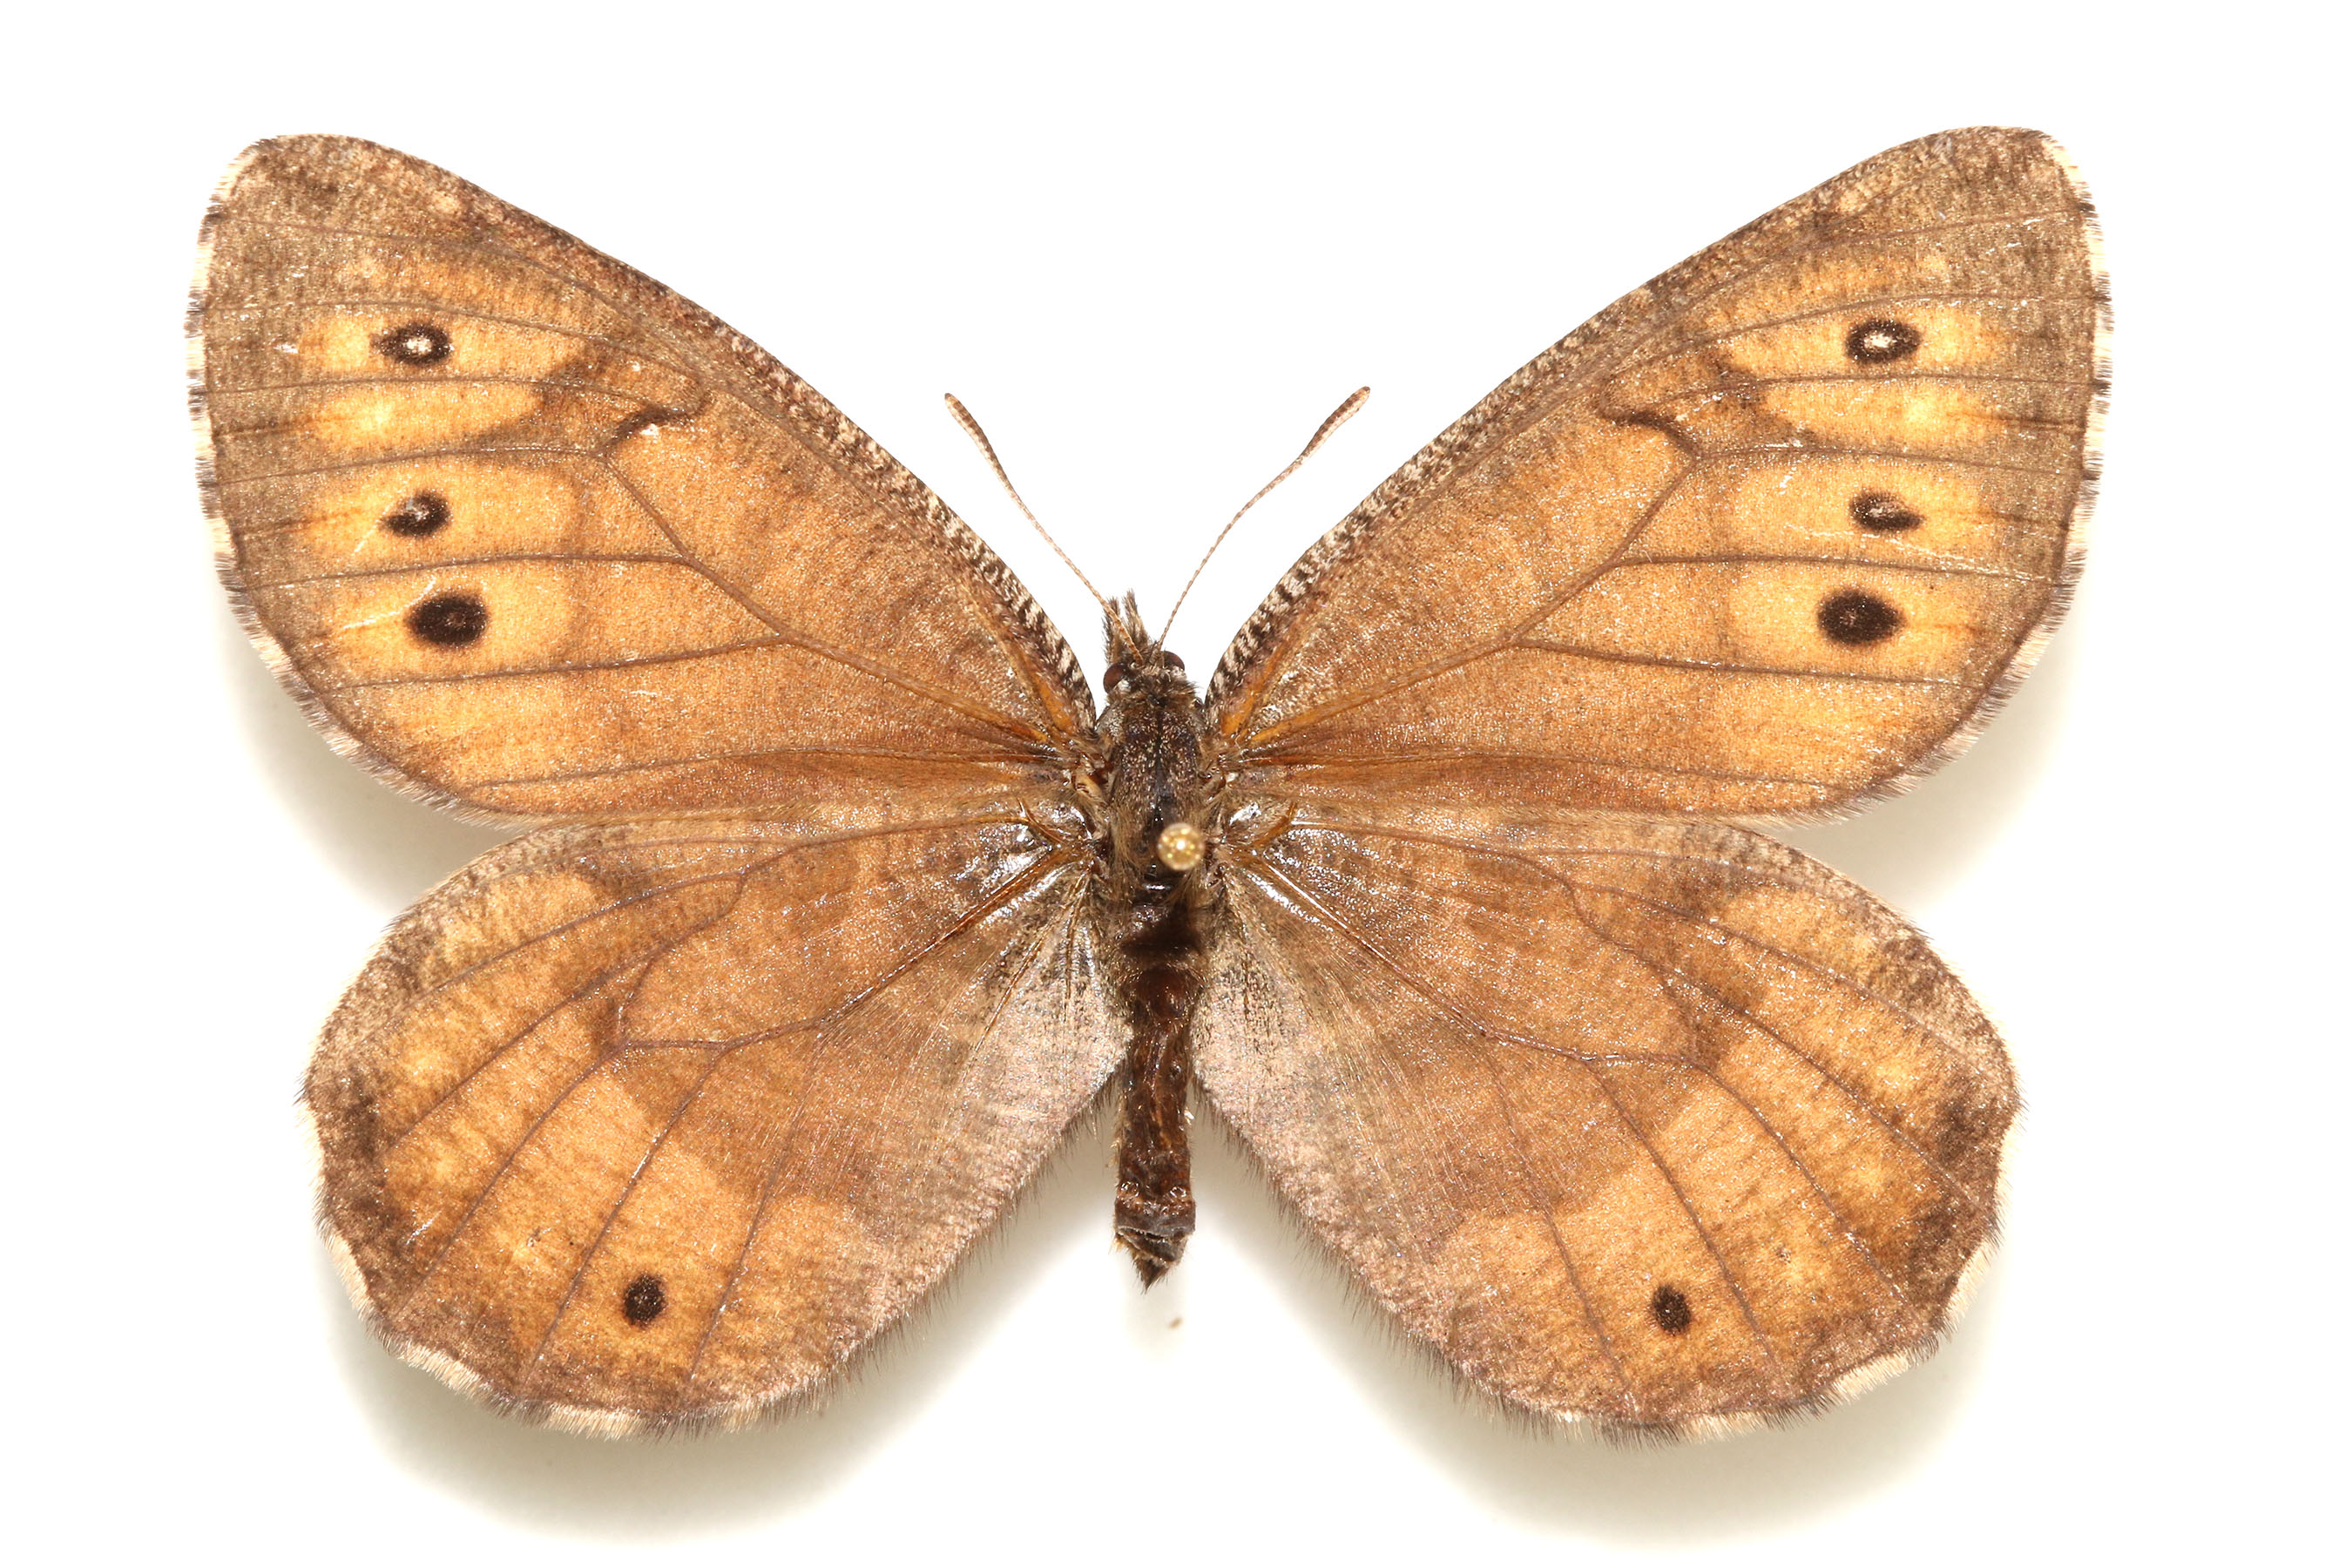 The top side of the Alaskan butterfly